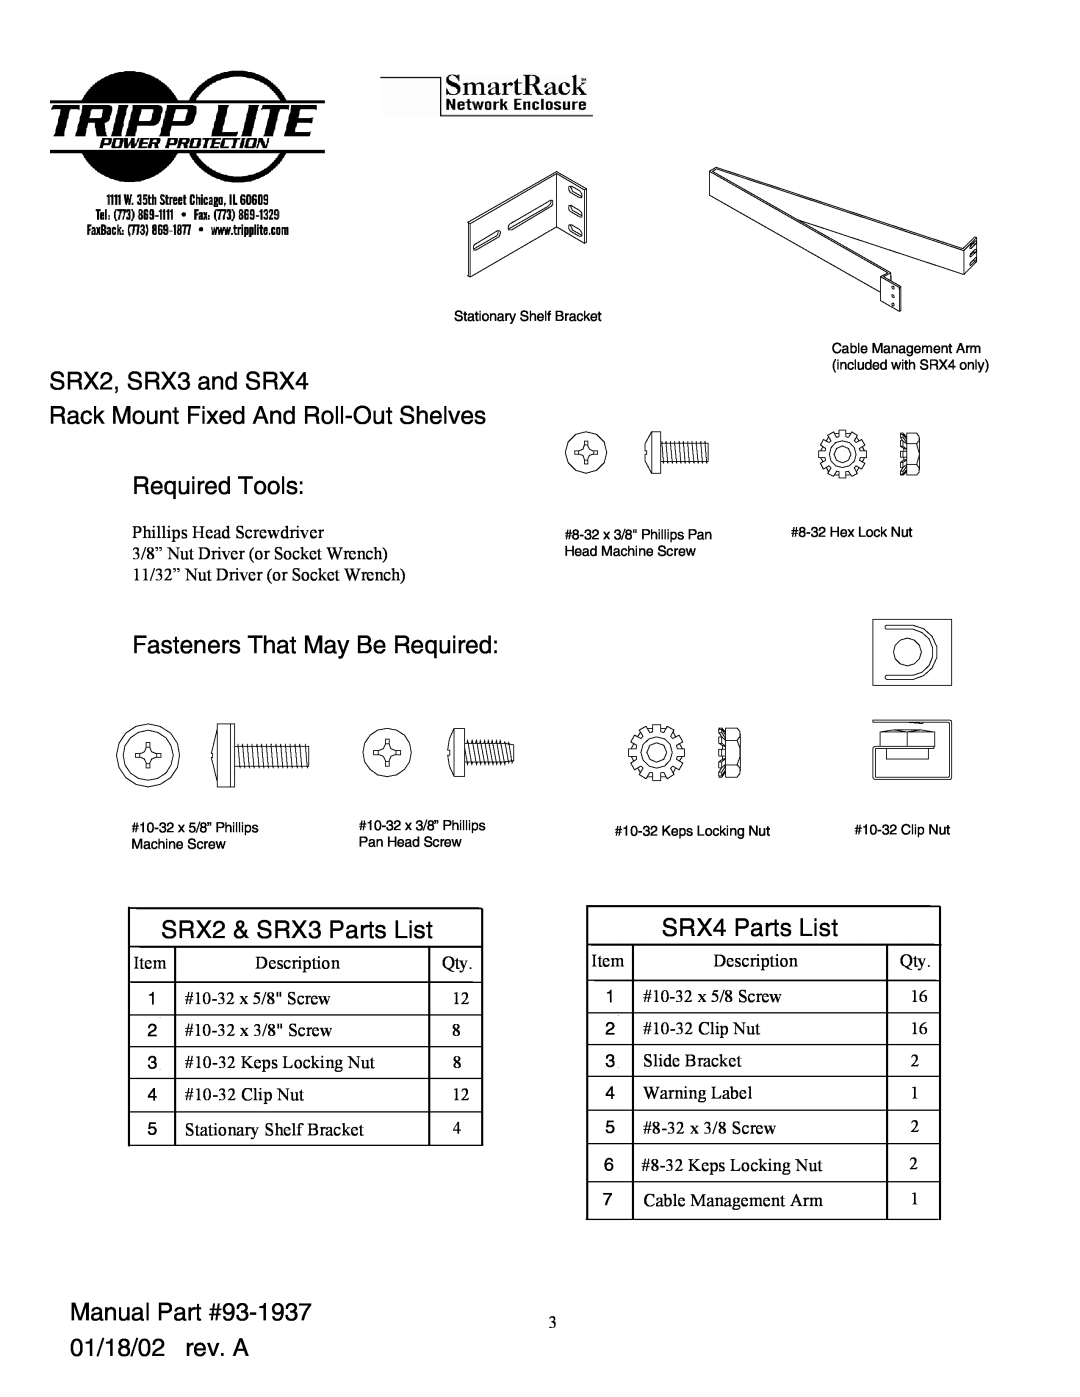 Tripp Lite Required Tools, Fasteners That May Be Required, SRX2 & SRX3 Parts List, SRX4 Parts List, SRX2, SRX3 and SRX4 